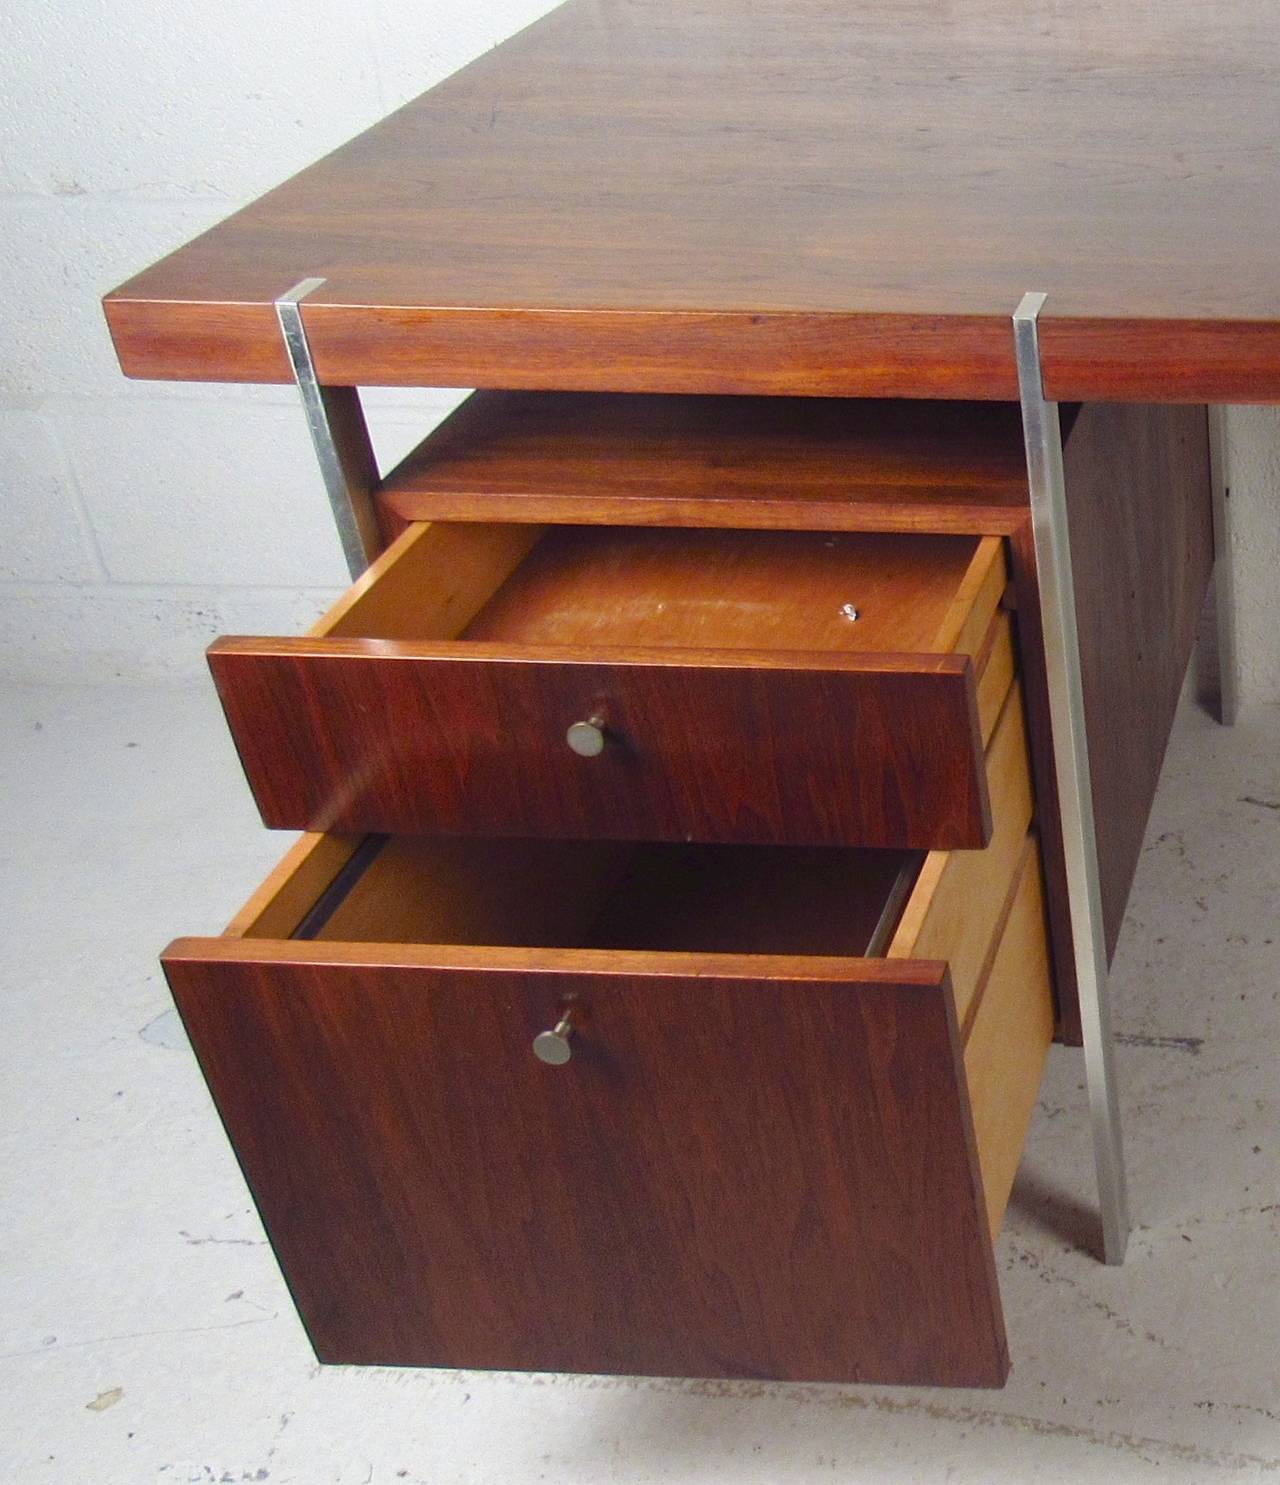 Seek and simple mid-century desk with floating style top and polished chrome legs. Two drawers with matching chrome pulls, large walnut top.

(Please confirm item location - NY or NJ - with dealer)